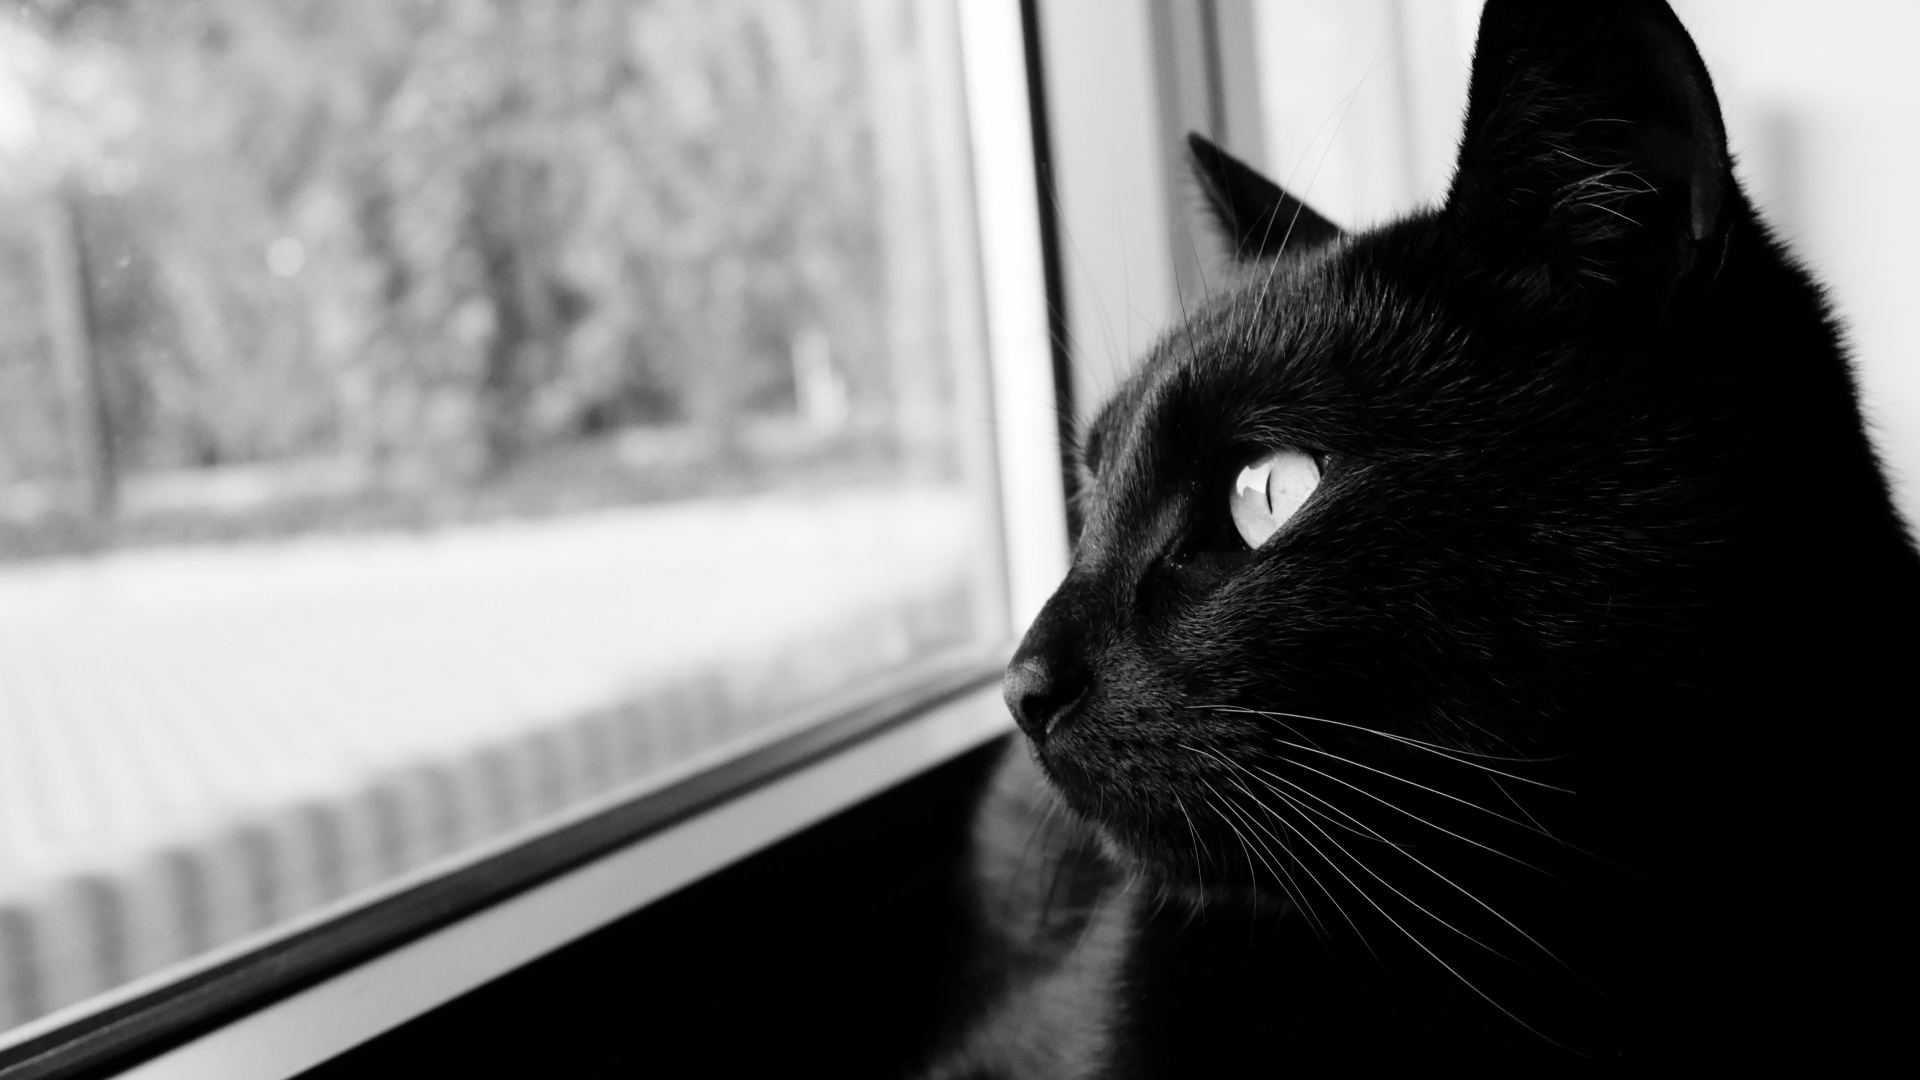 Black Cat Looking at The Window. Wallpaper in 1920x1080 Resolution